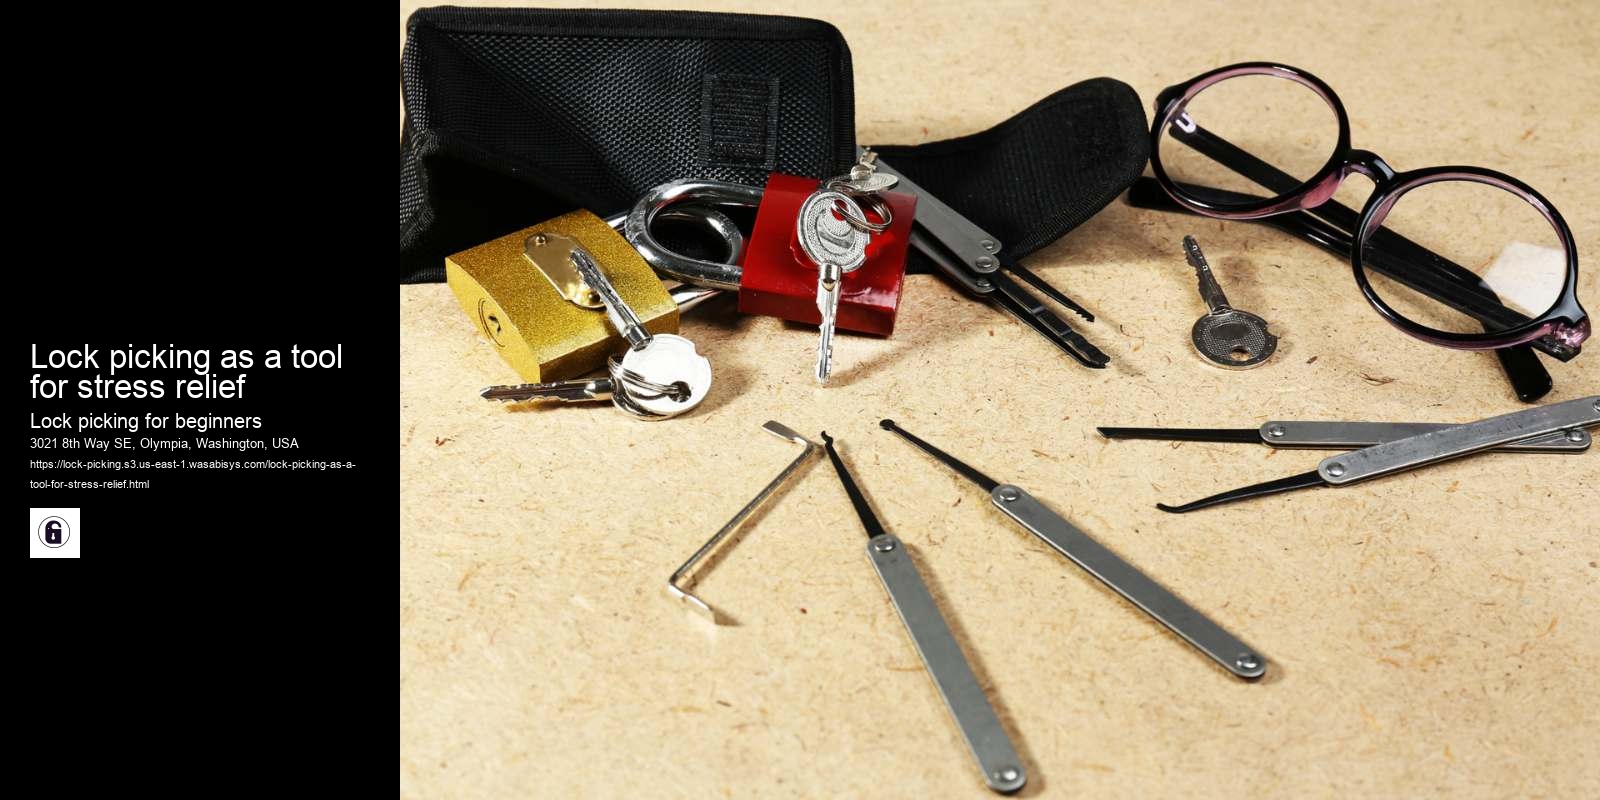 Lock picking as a tool for stress relief